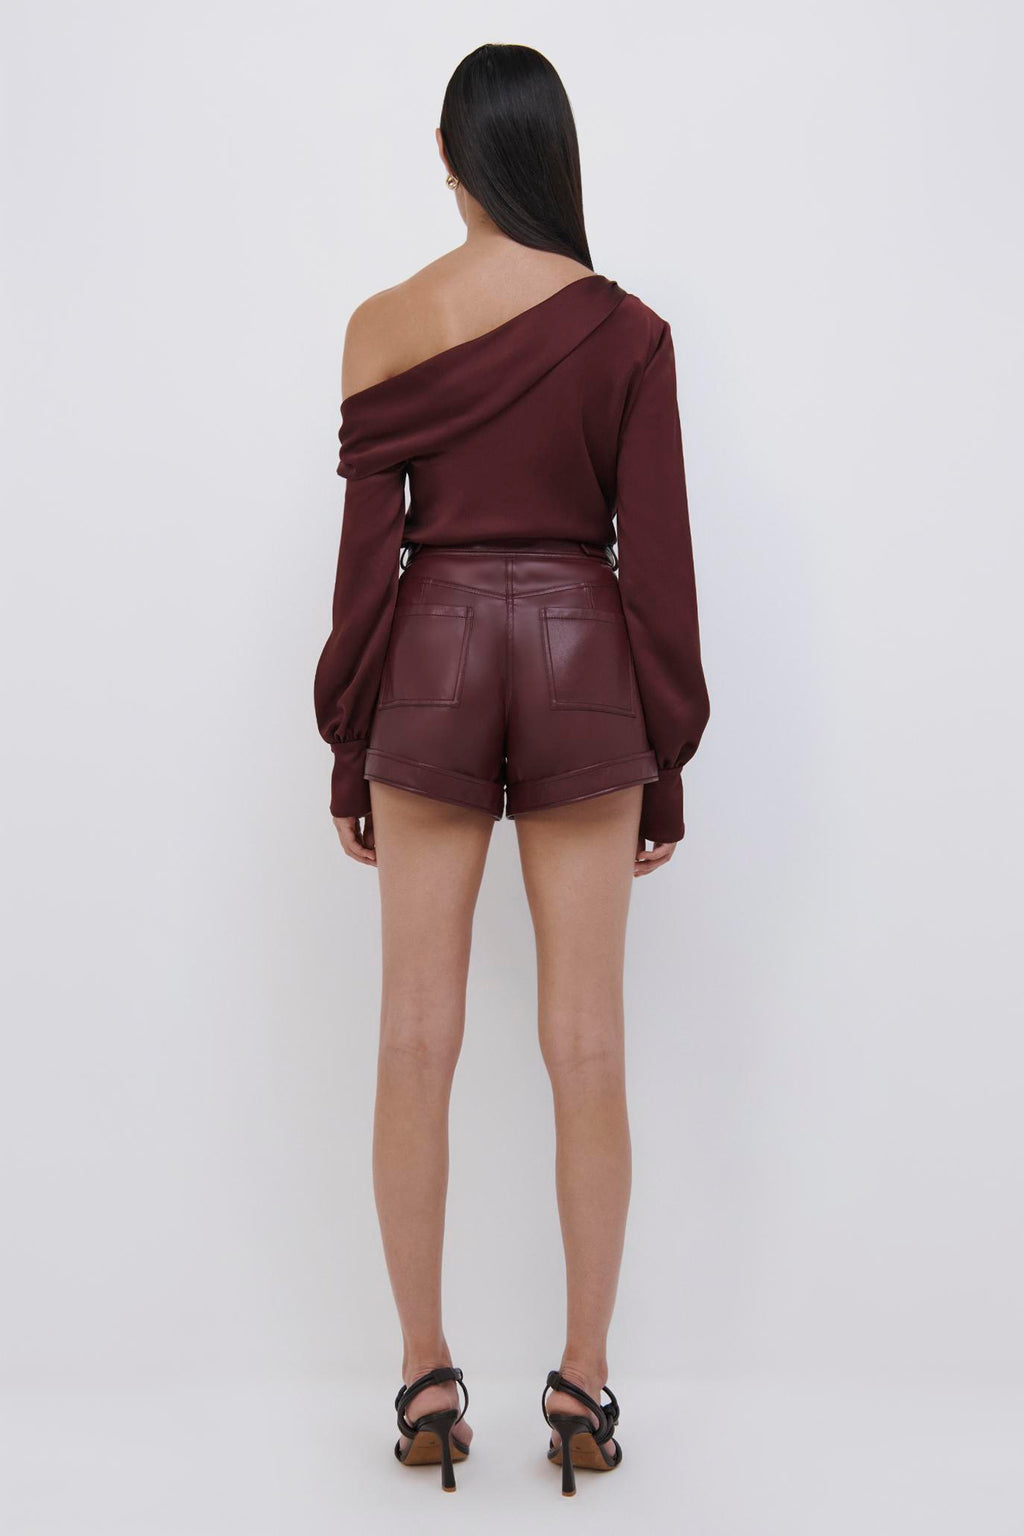 Chace Vegan Leather Short